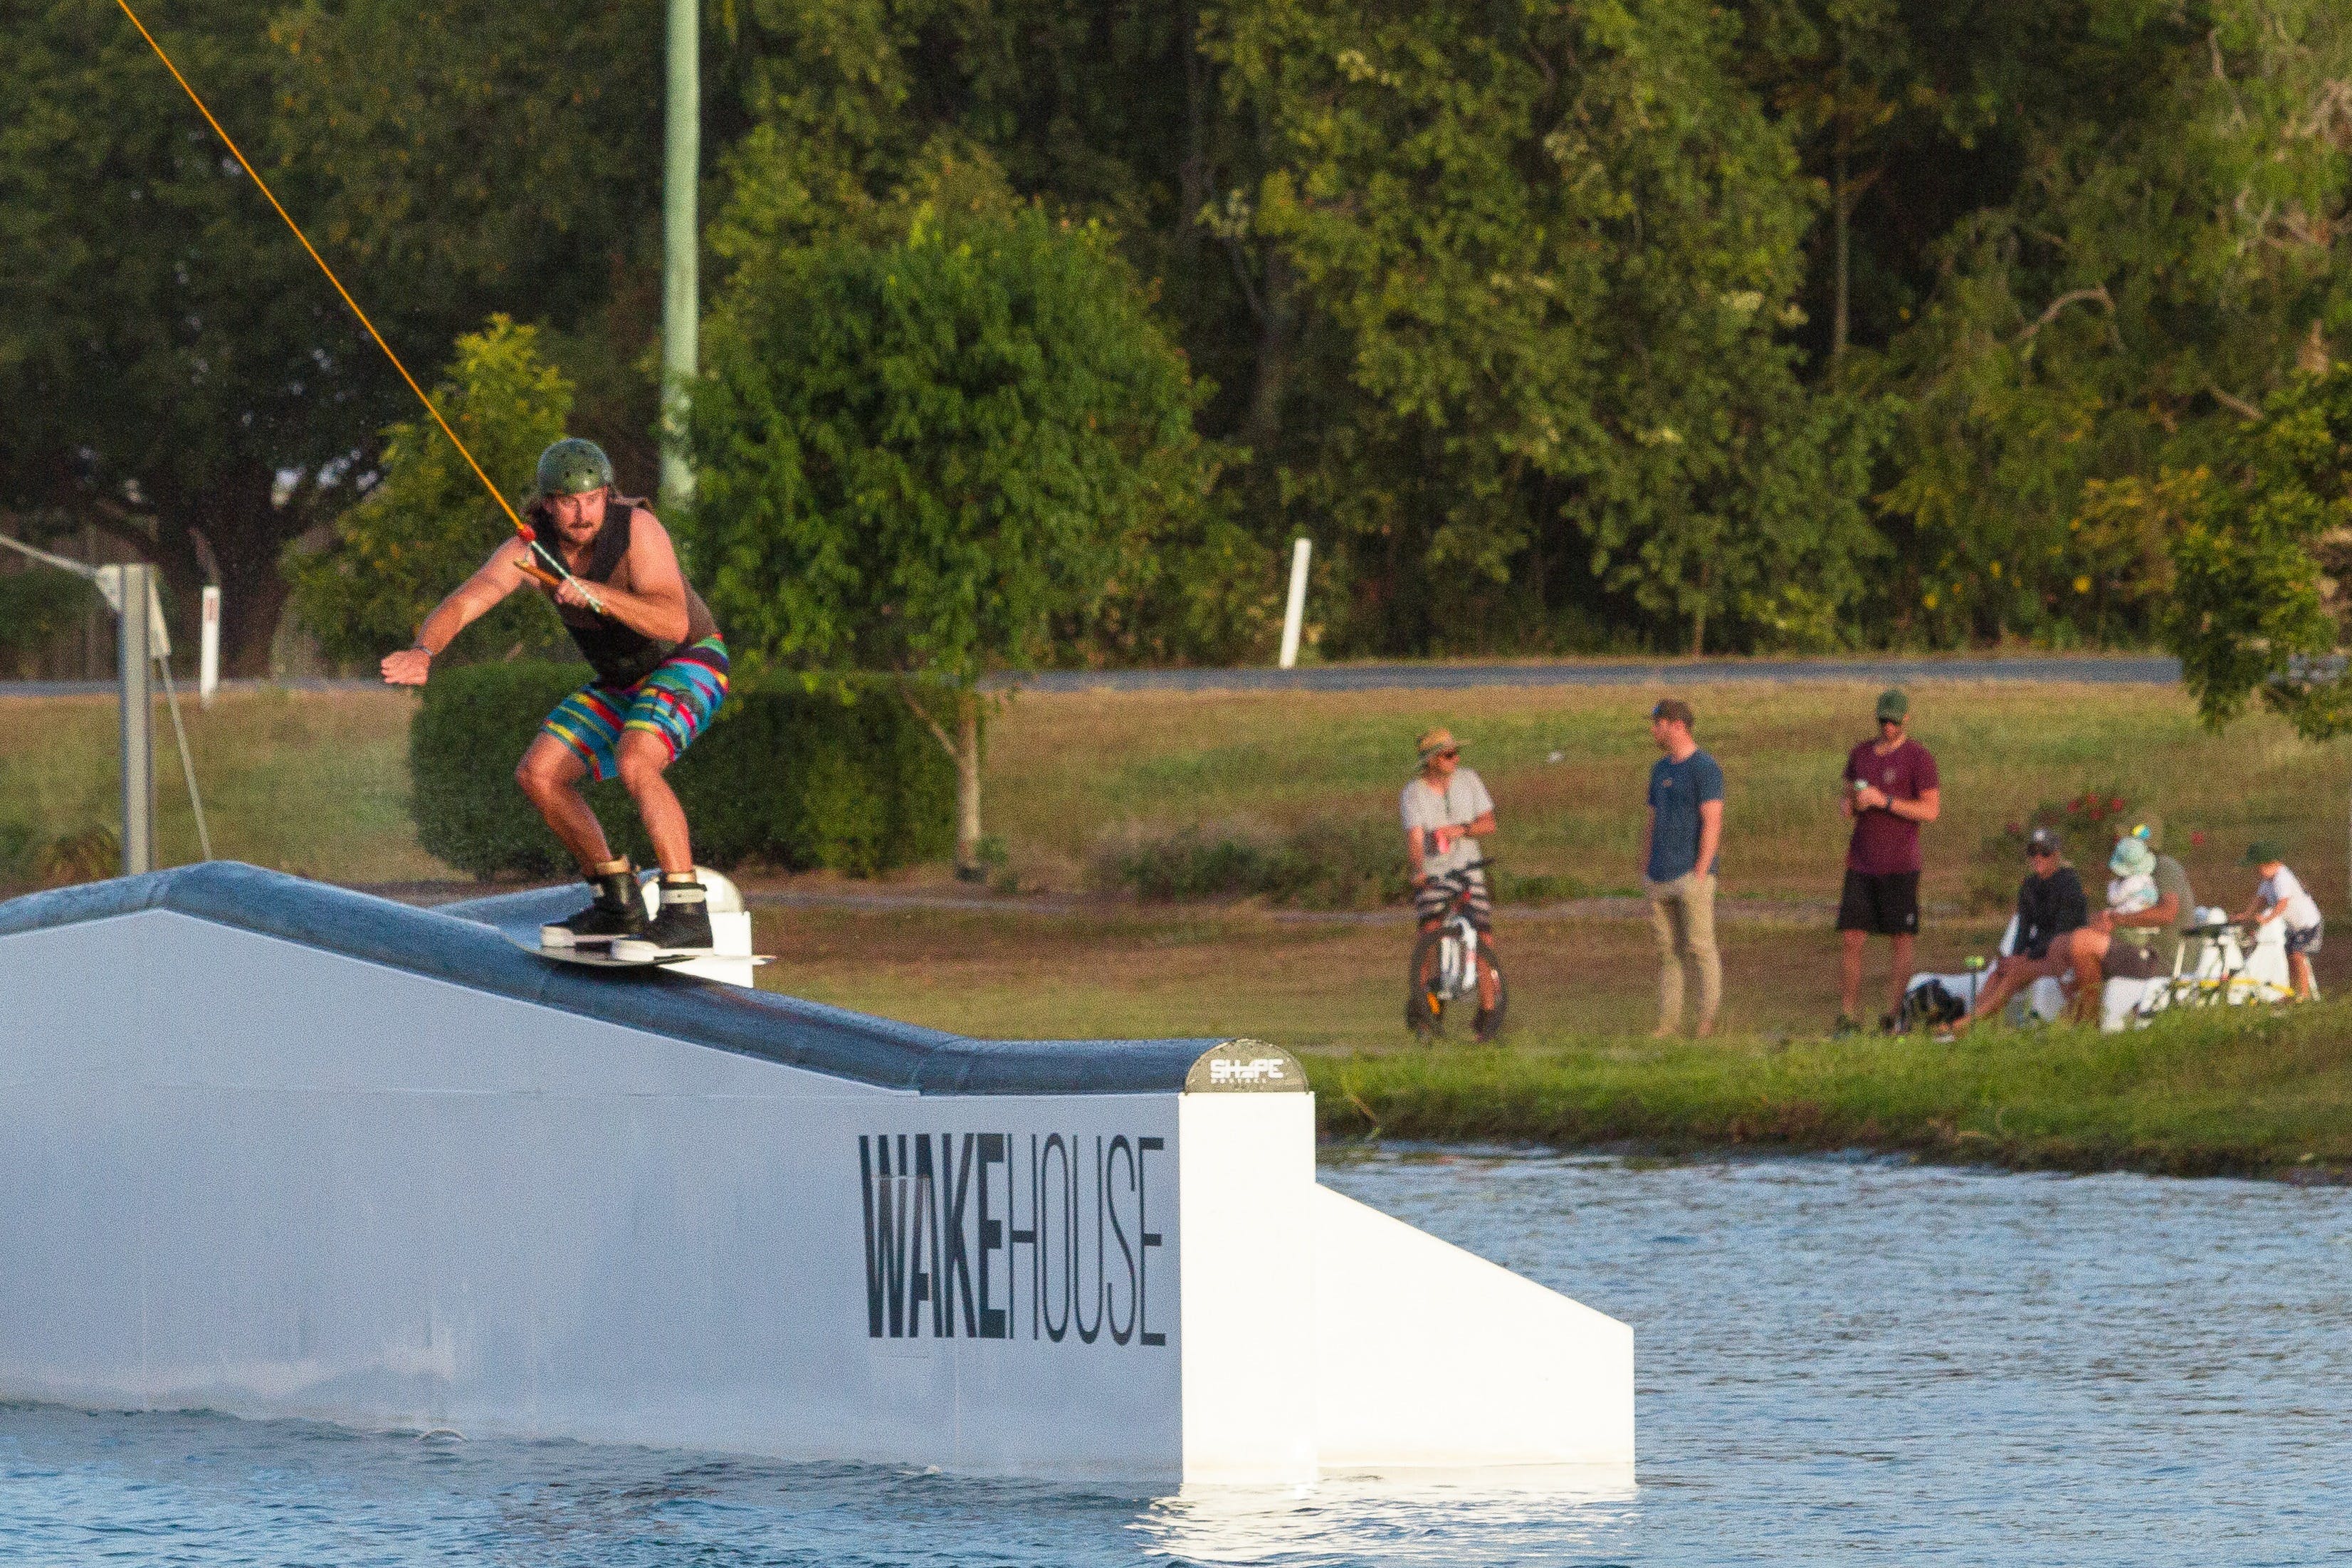 Cash for Tricks - Wakeboarding Comp - Great Ocean Road Tourism